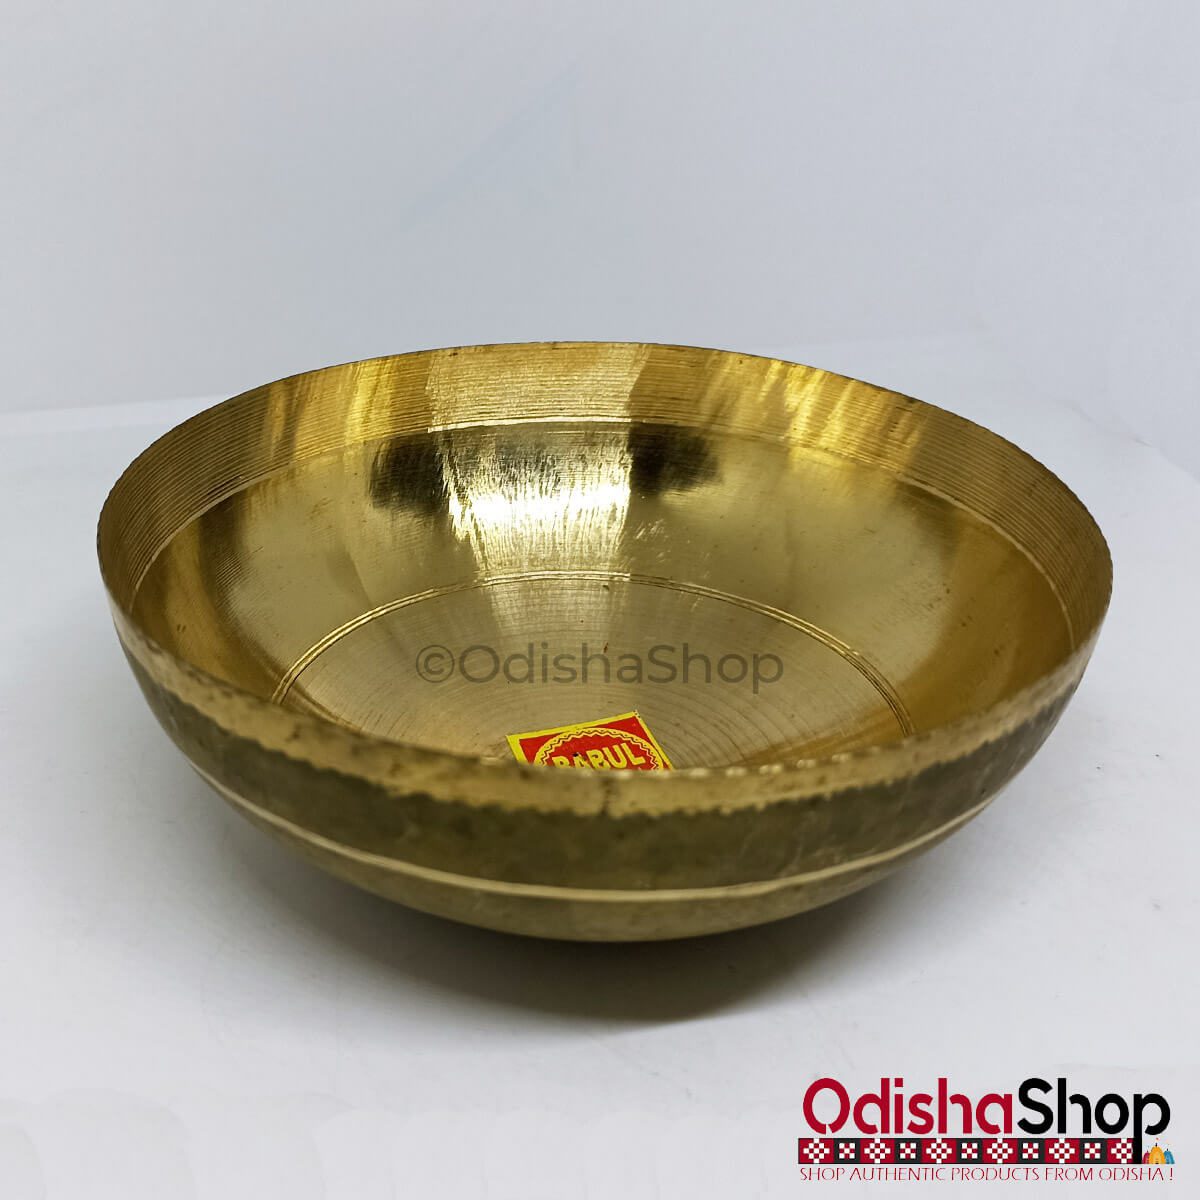 You are currently viewing Handcrafted Brass Puja Katori